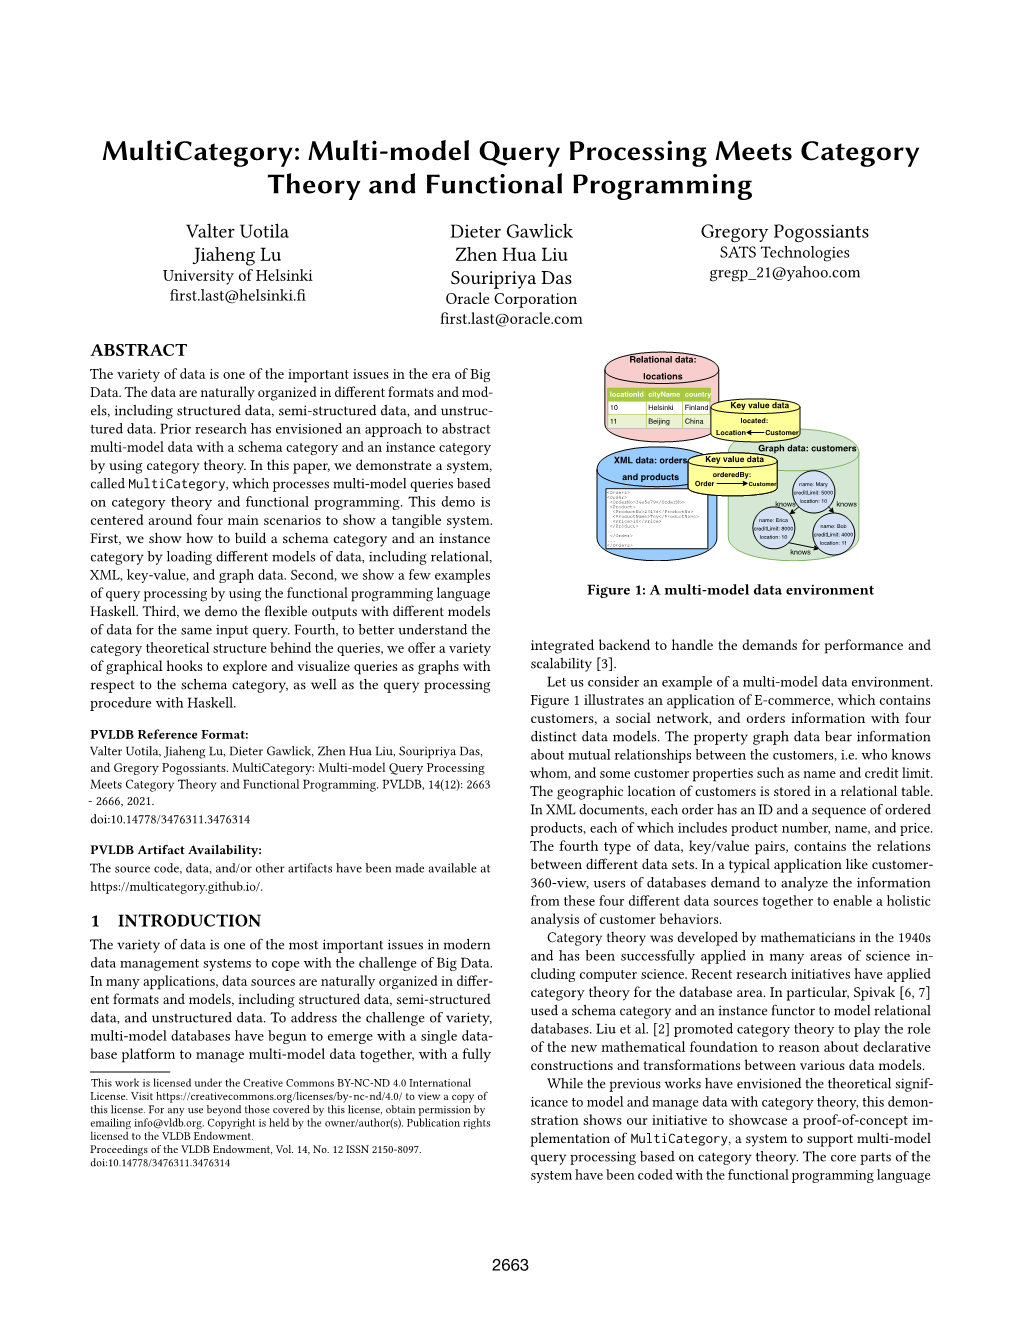 Multi-Model Query Processing Meets Category Theory and Functional Programming